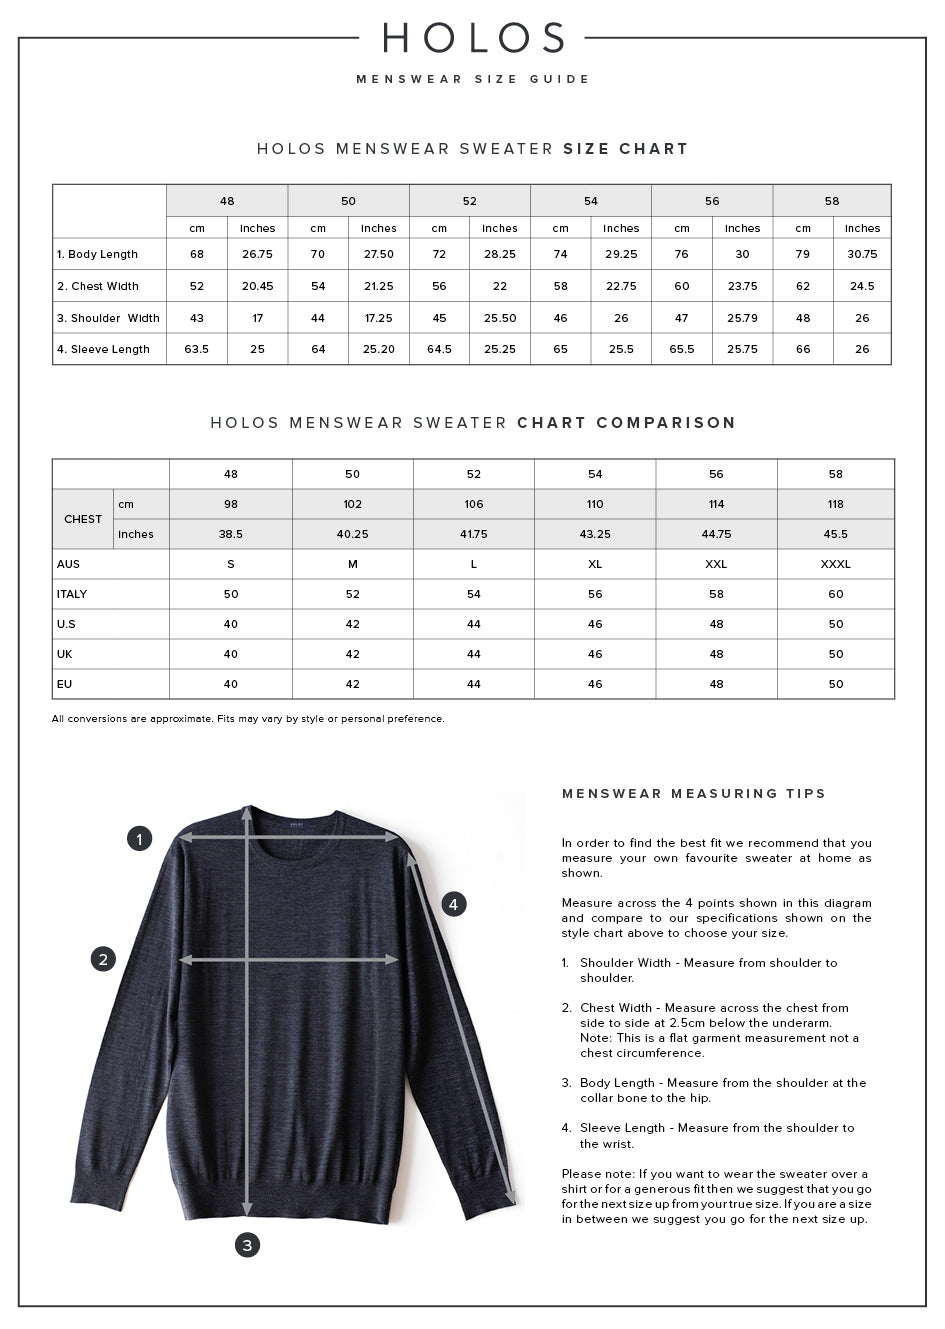 HOLOS Men's Sweater Size Guide